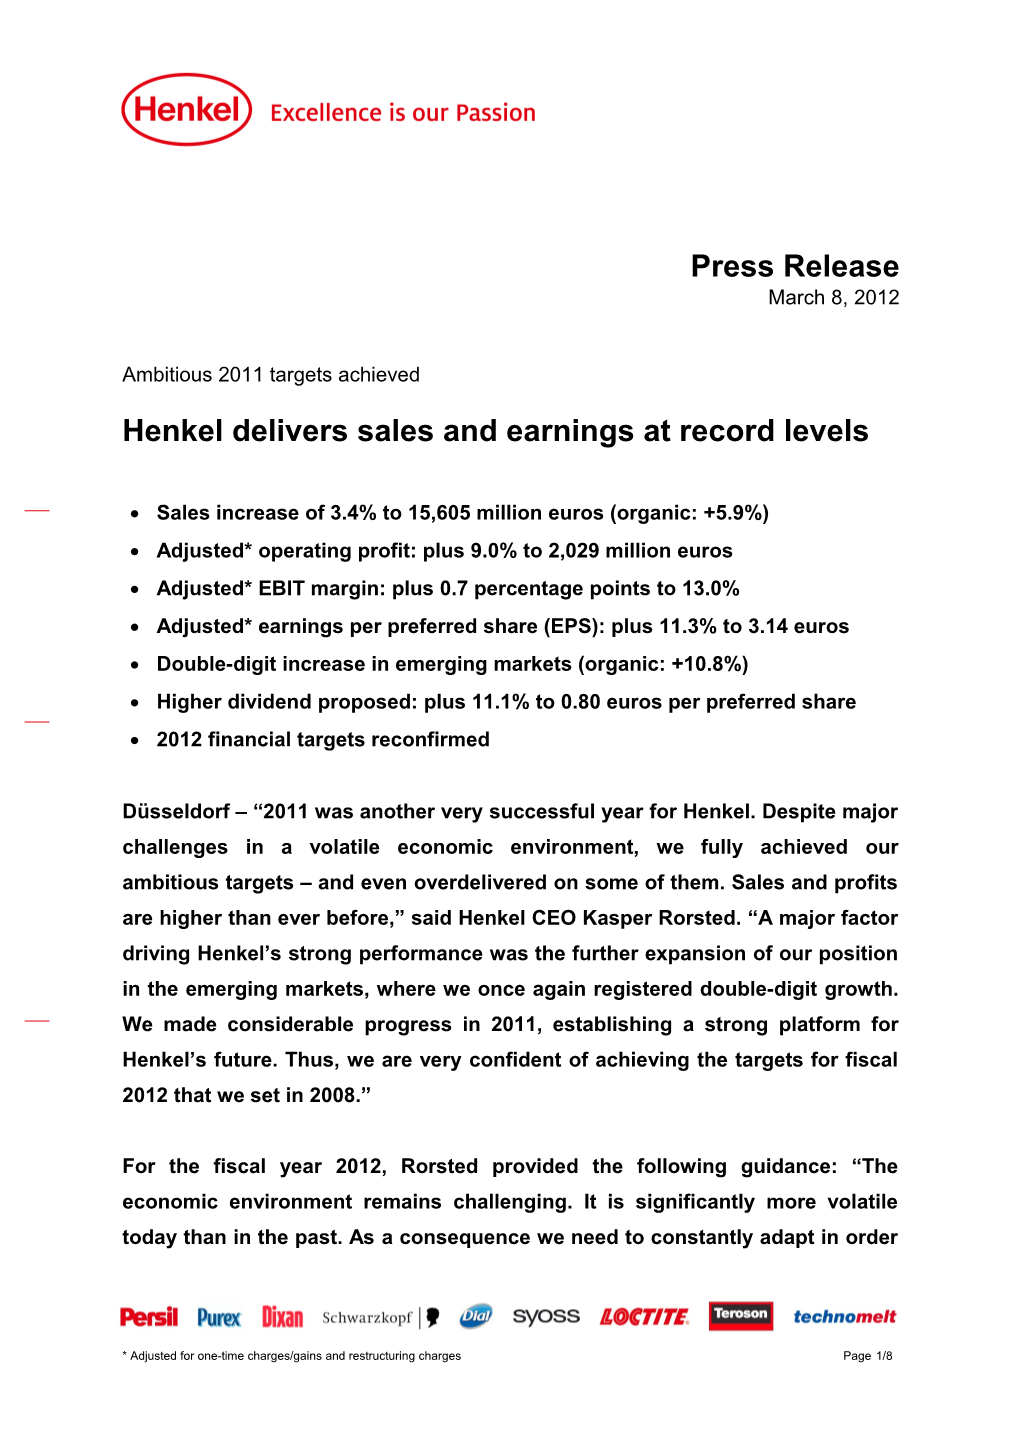 Henkel Delivers Sales and Earnings at Record Levels